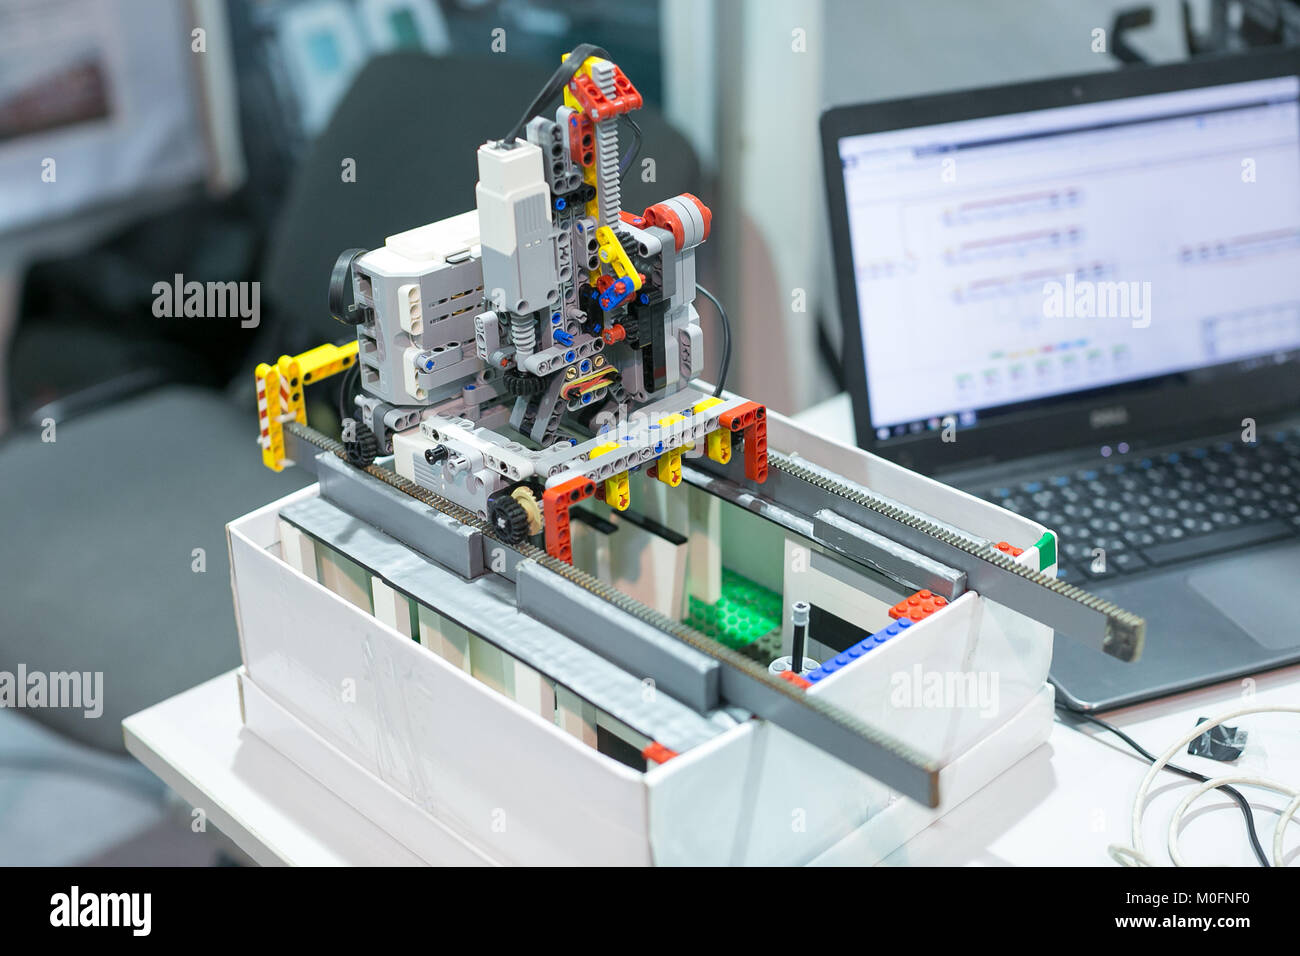 science, engineering, technological revolution concept. there is unusual electronic device created of small details of lego construction kit and conne Stock Photo